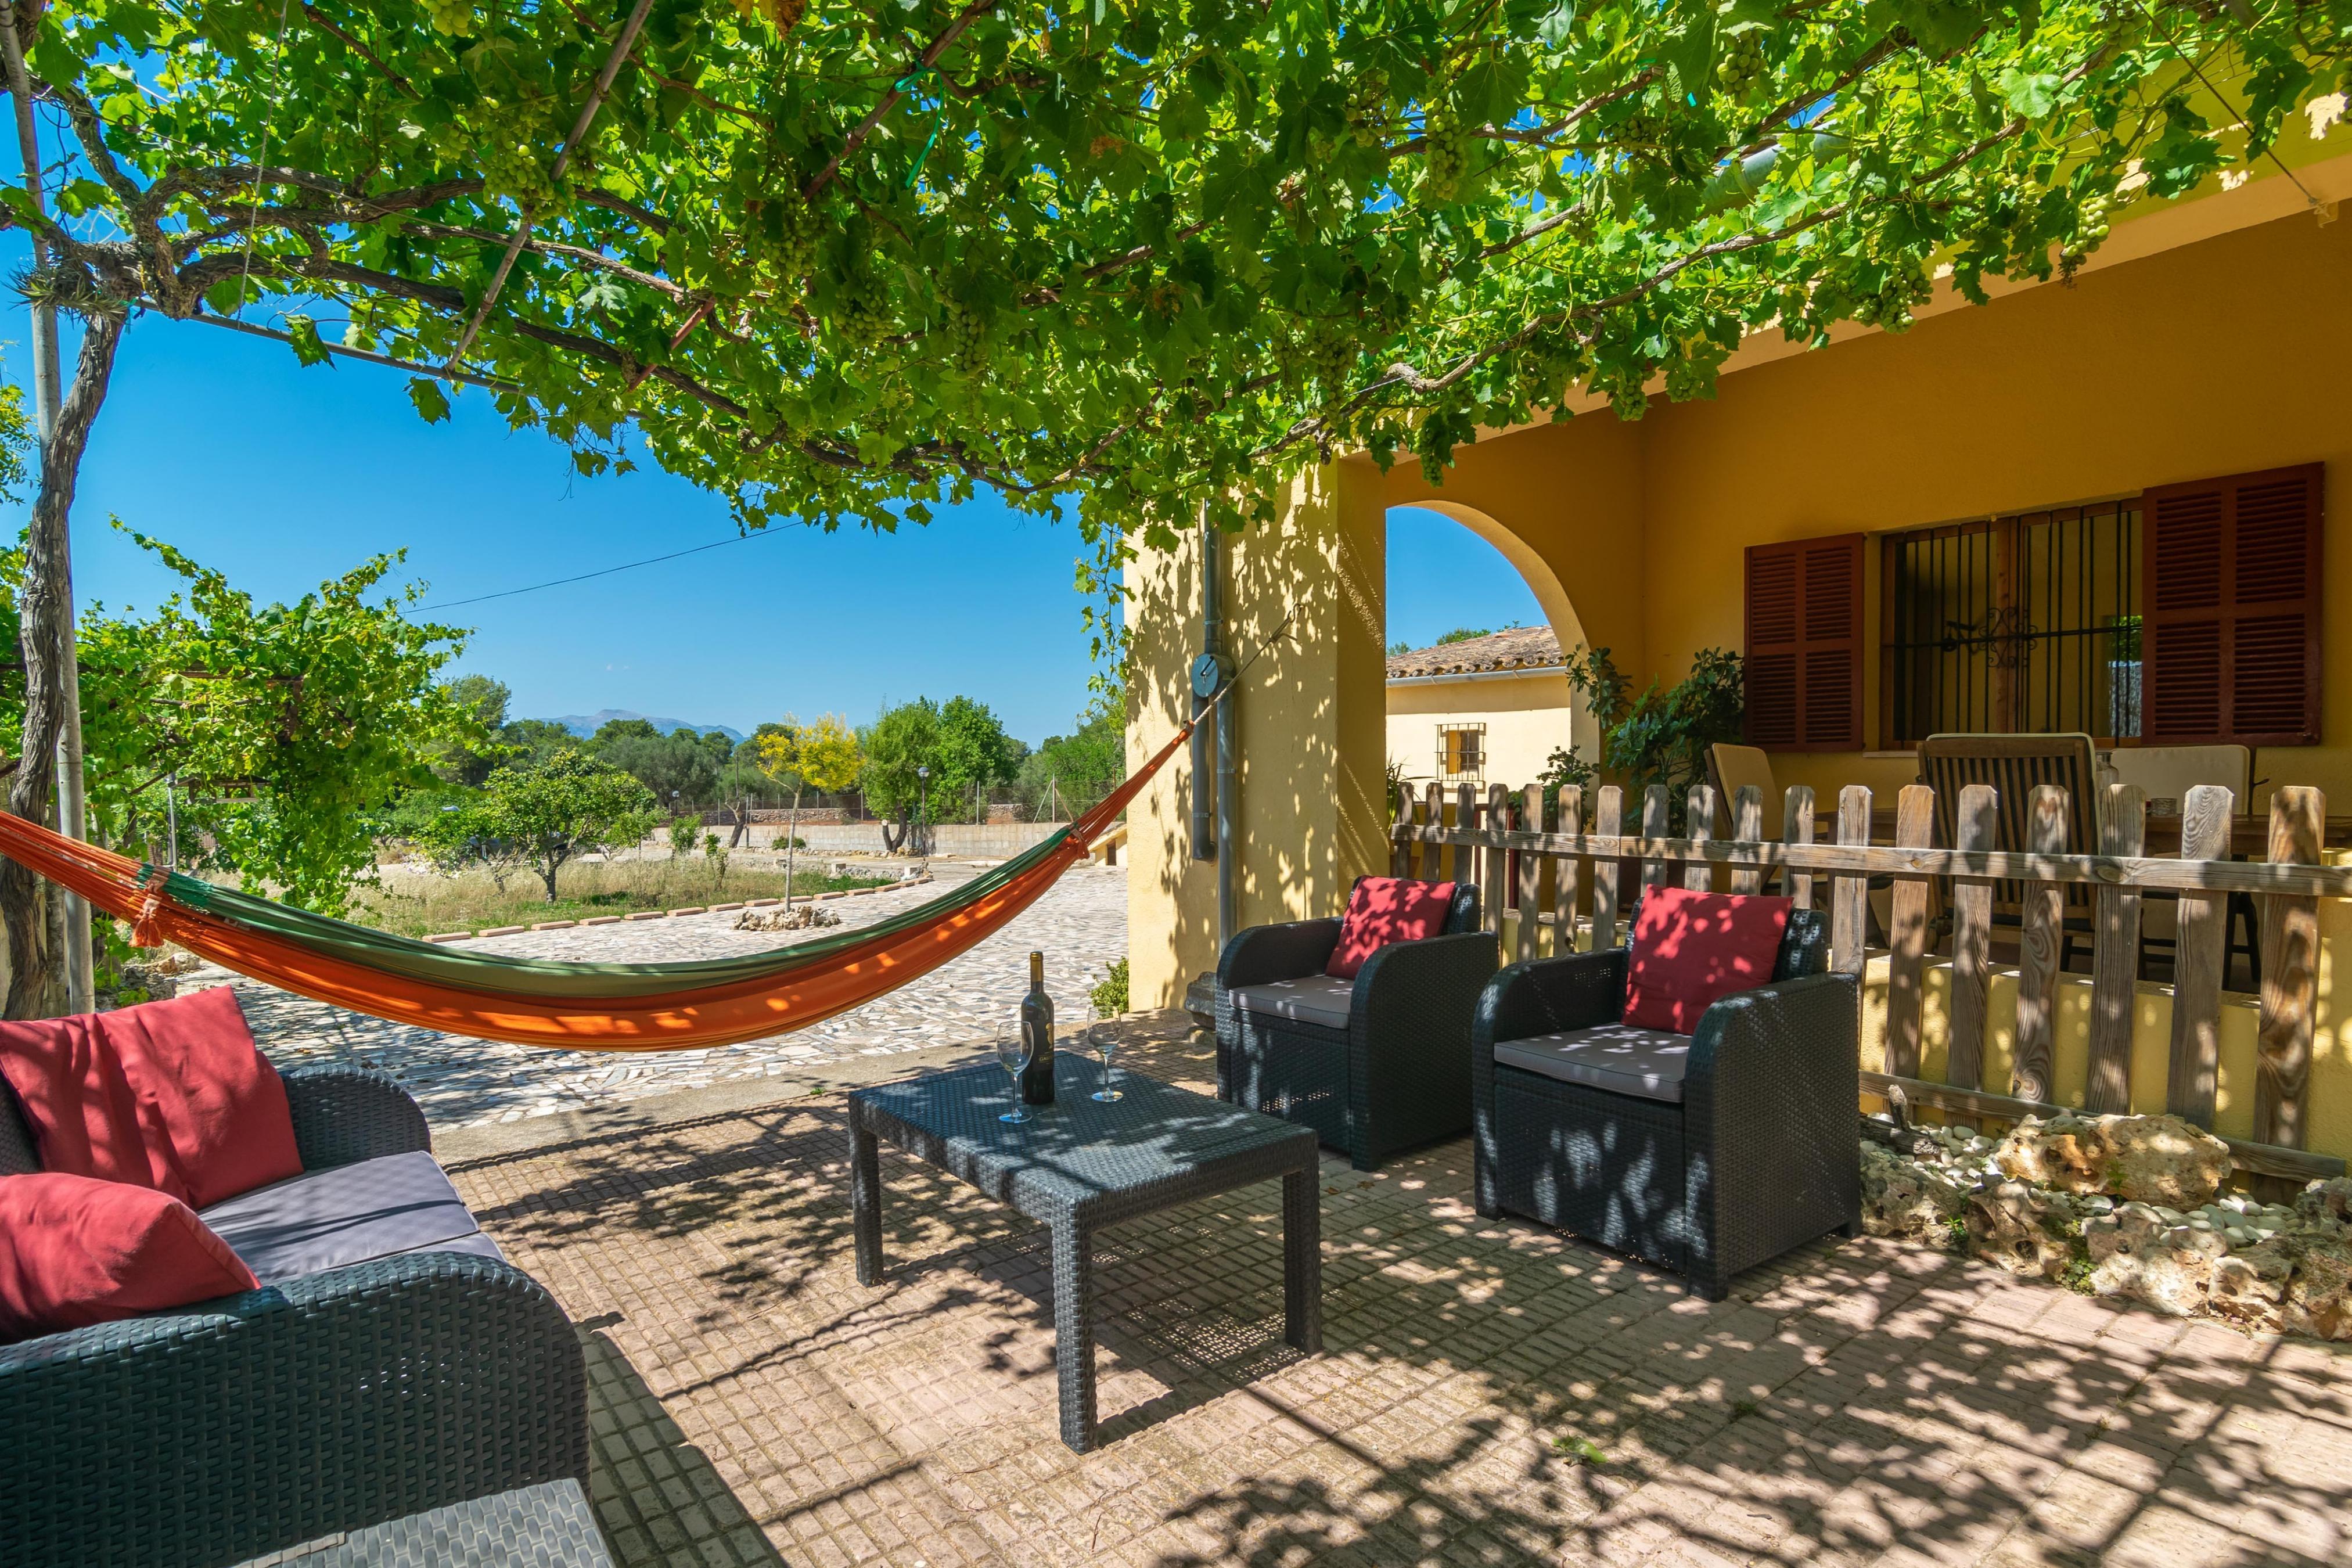 Property Image 1 - SA RACONADA - Beautiful country house in a bucolic setting where you can enjoy the peace of the Mallorcan 